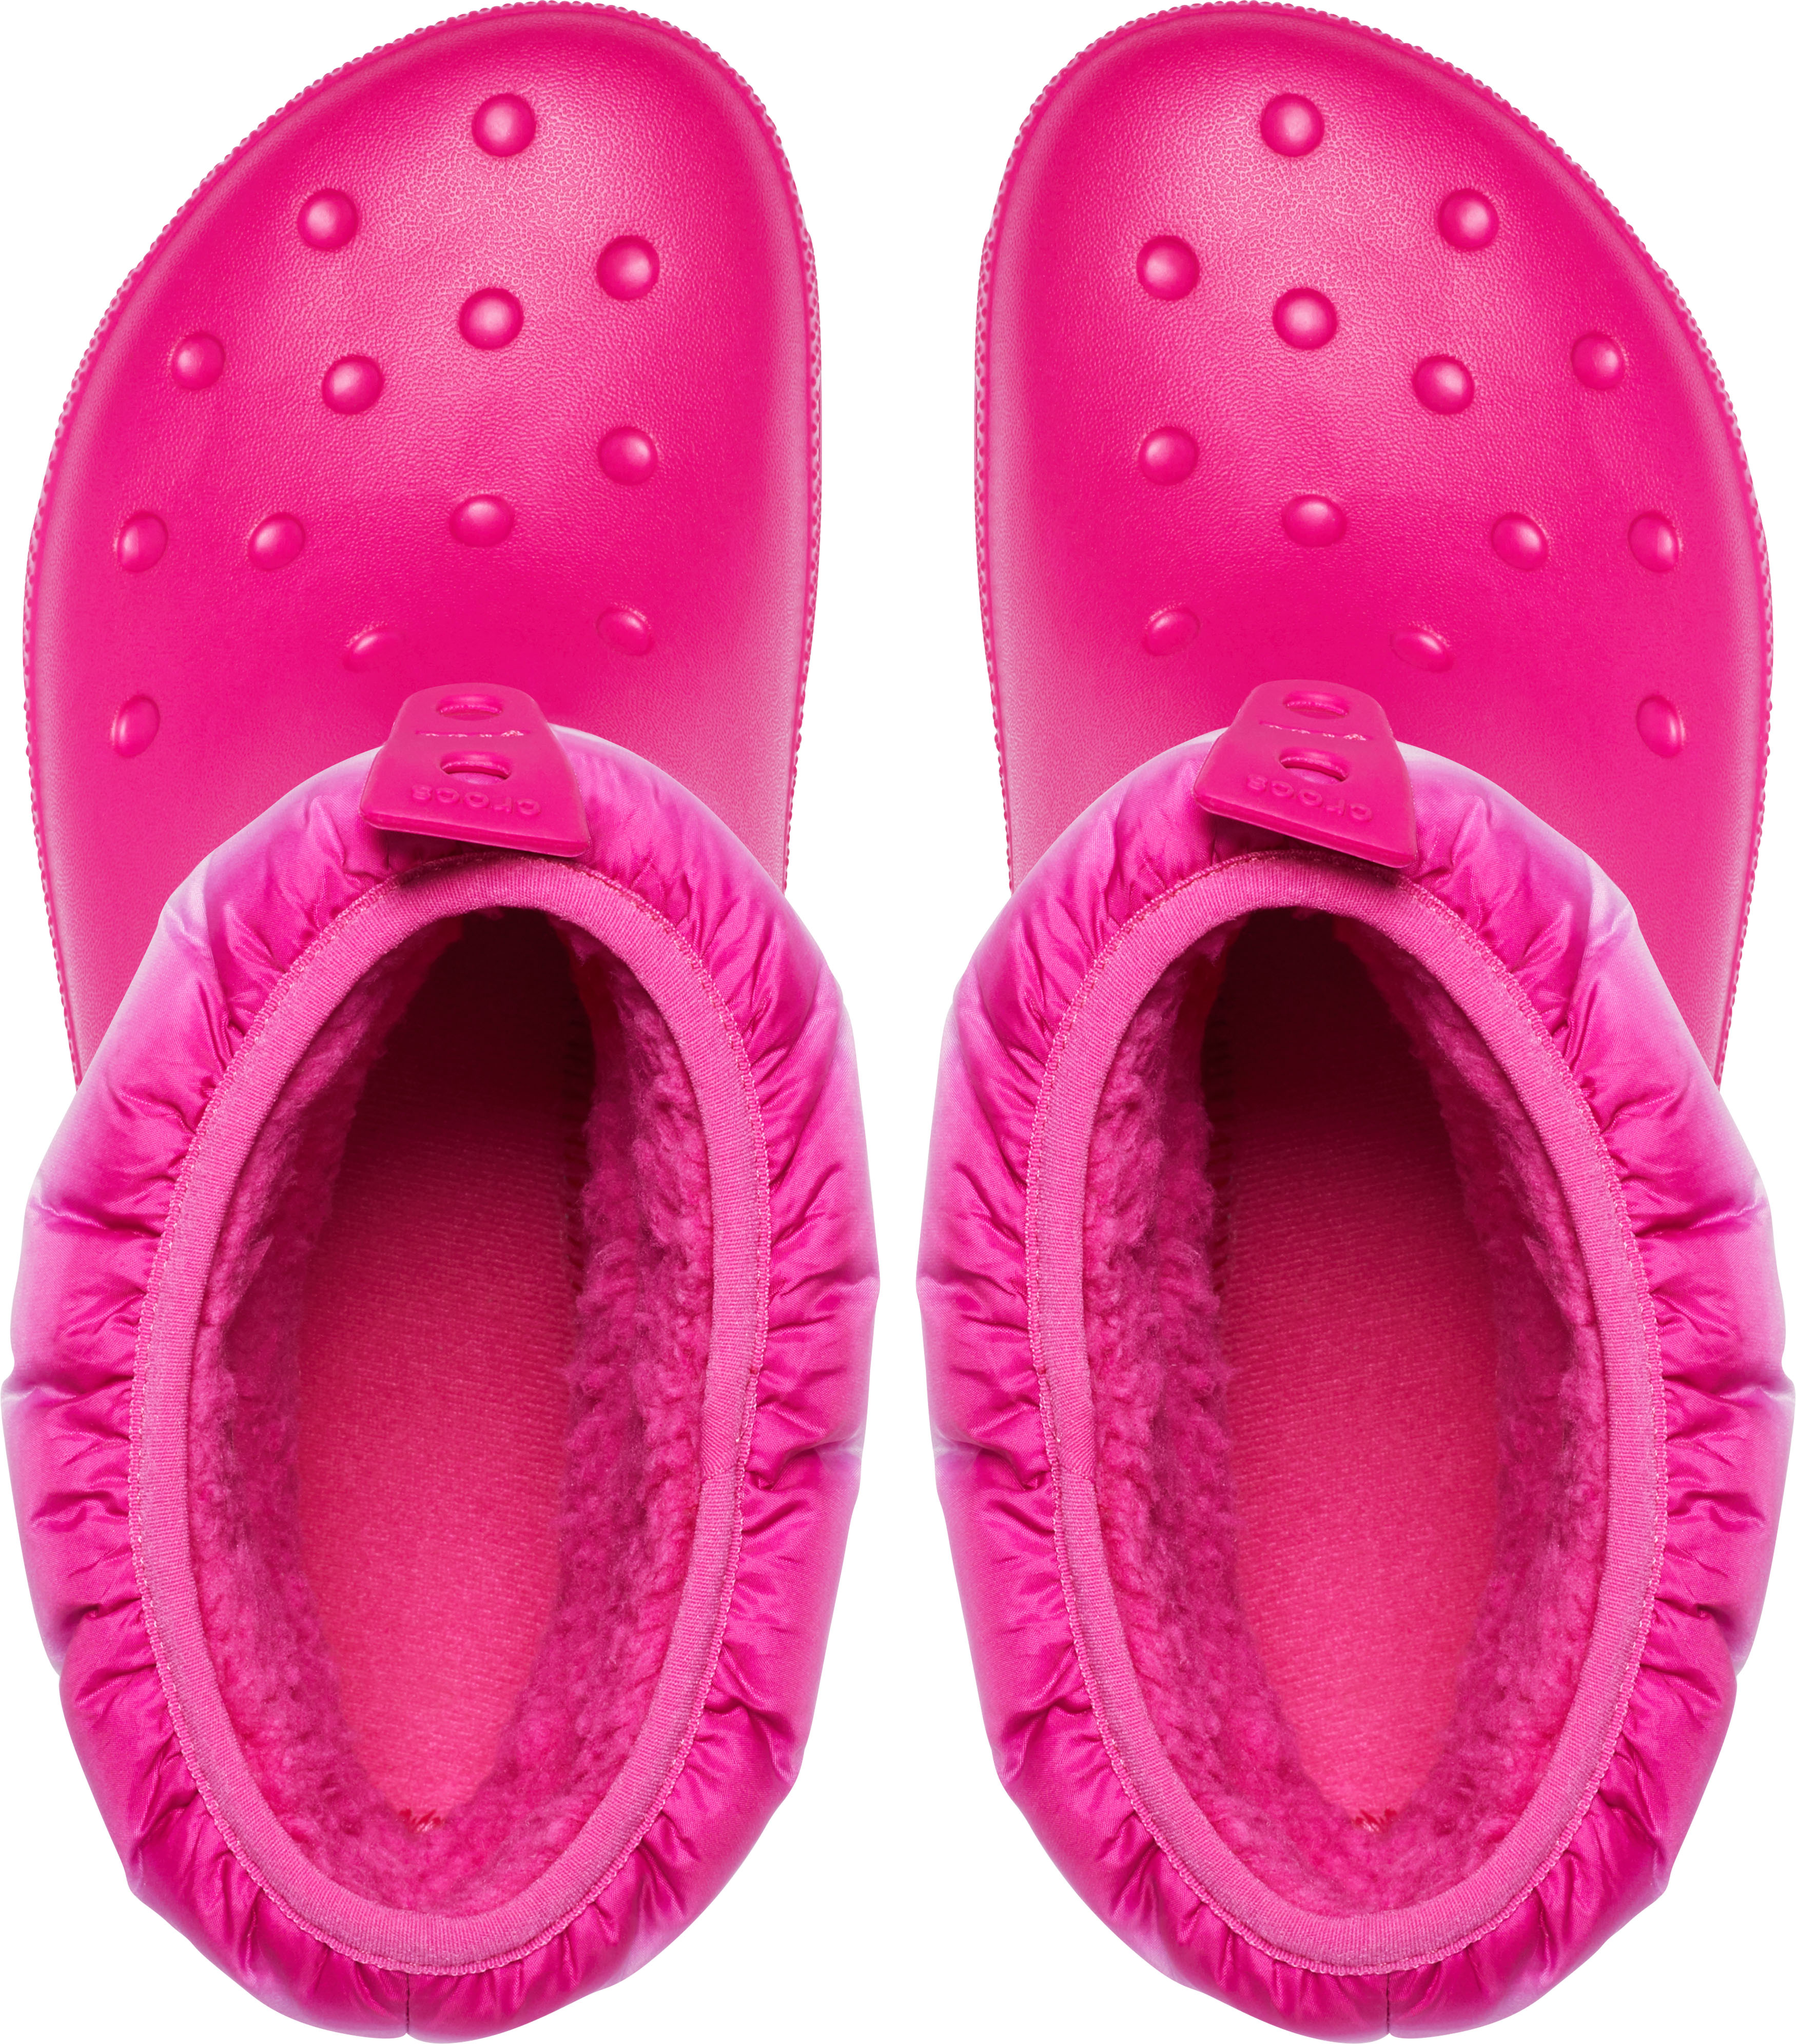 crocs Classic Neo Puff Shorty Boot - Candy Pink Croslite